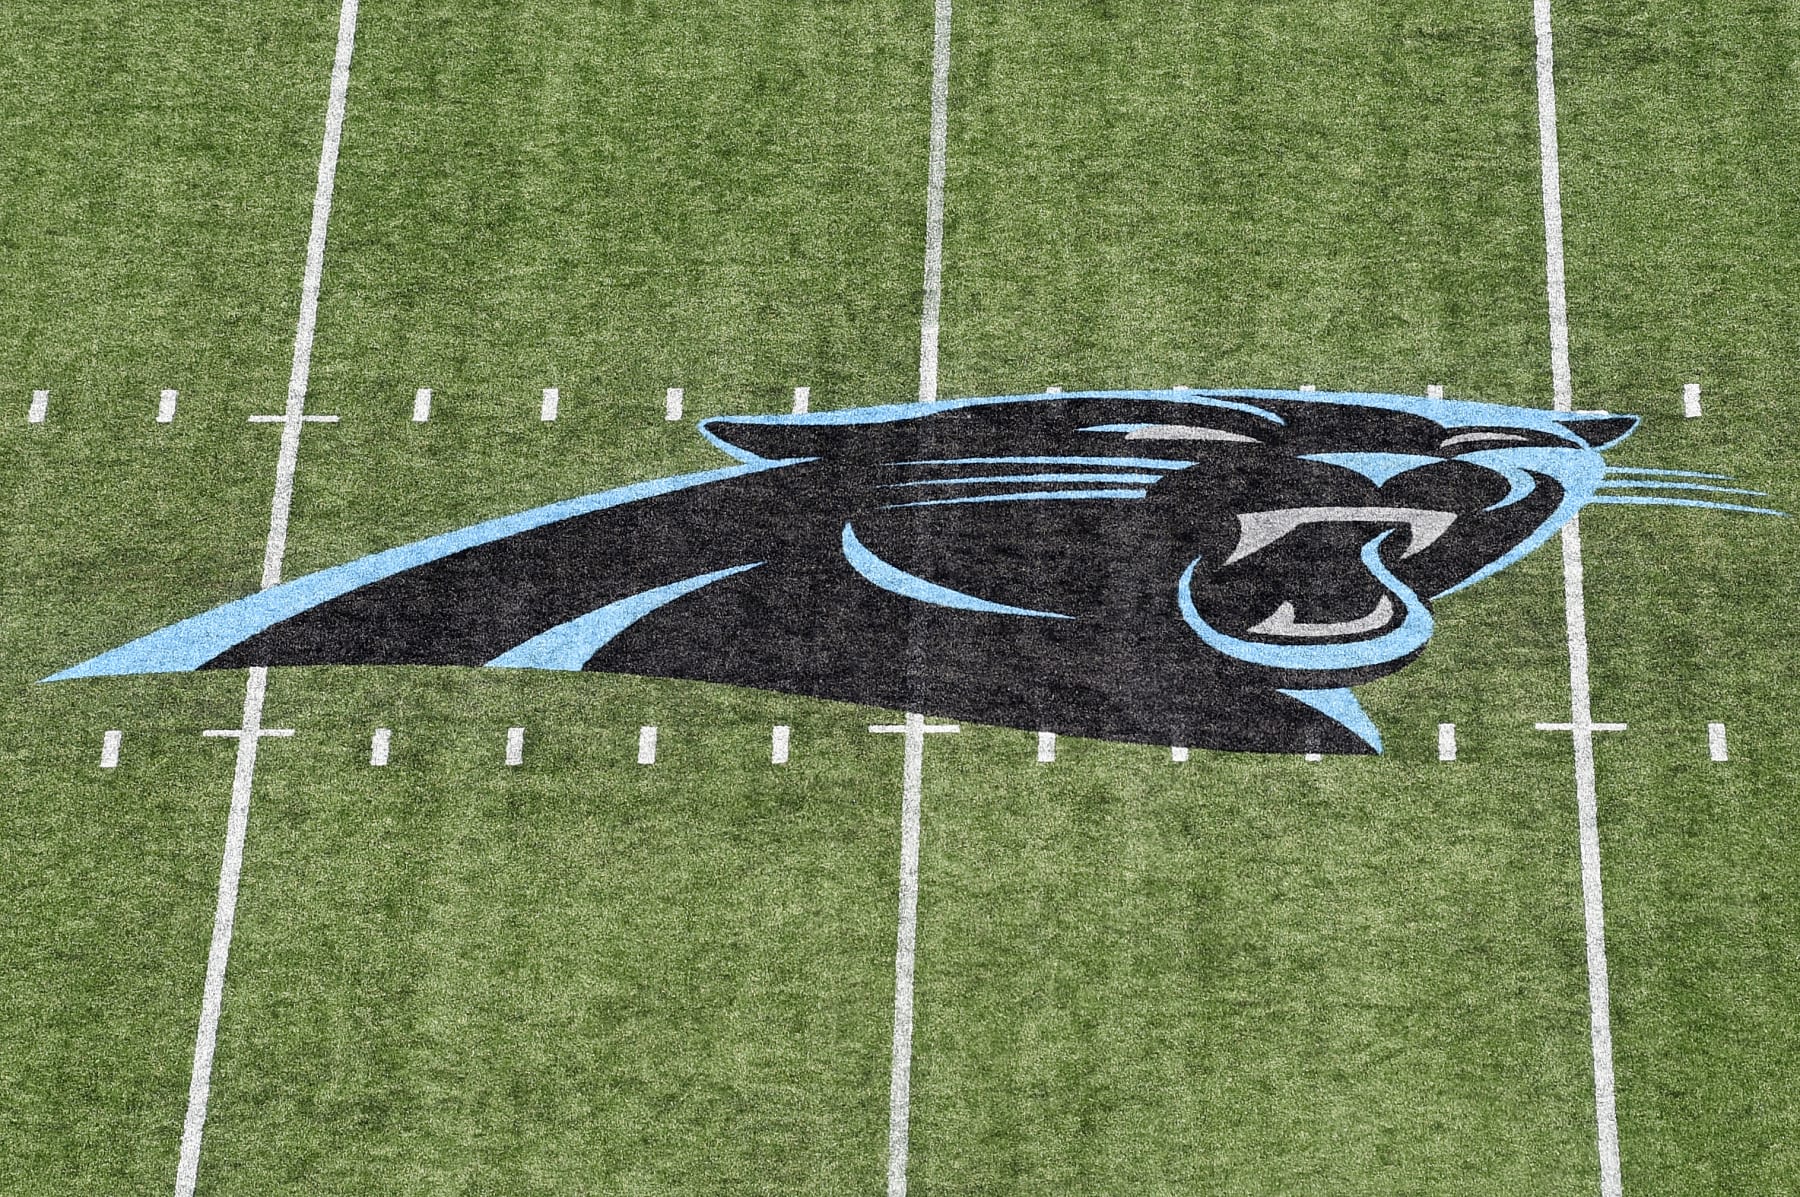 Read more about the article Panthers could get a new stadium in 2046, along with possible renovations to the existing facility